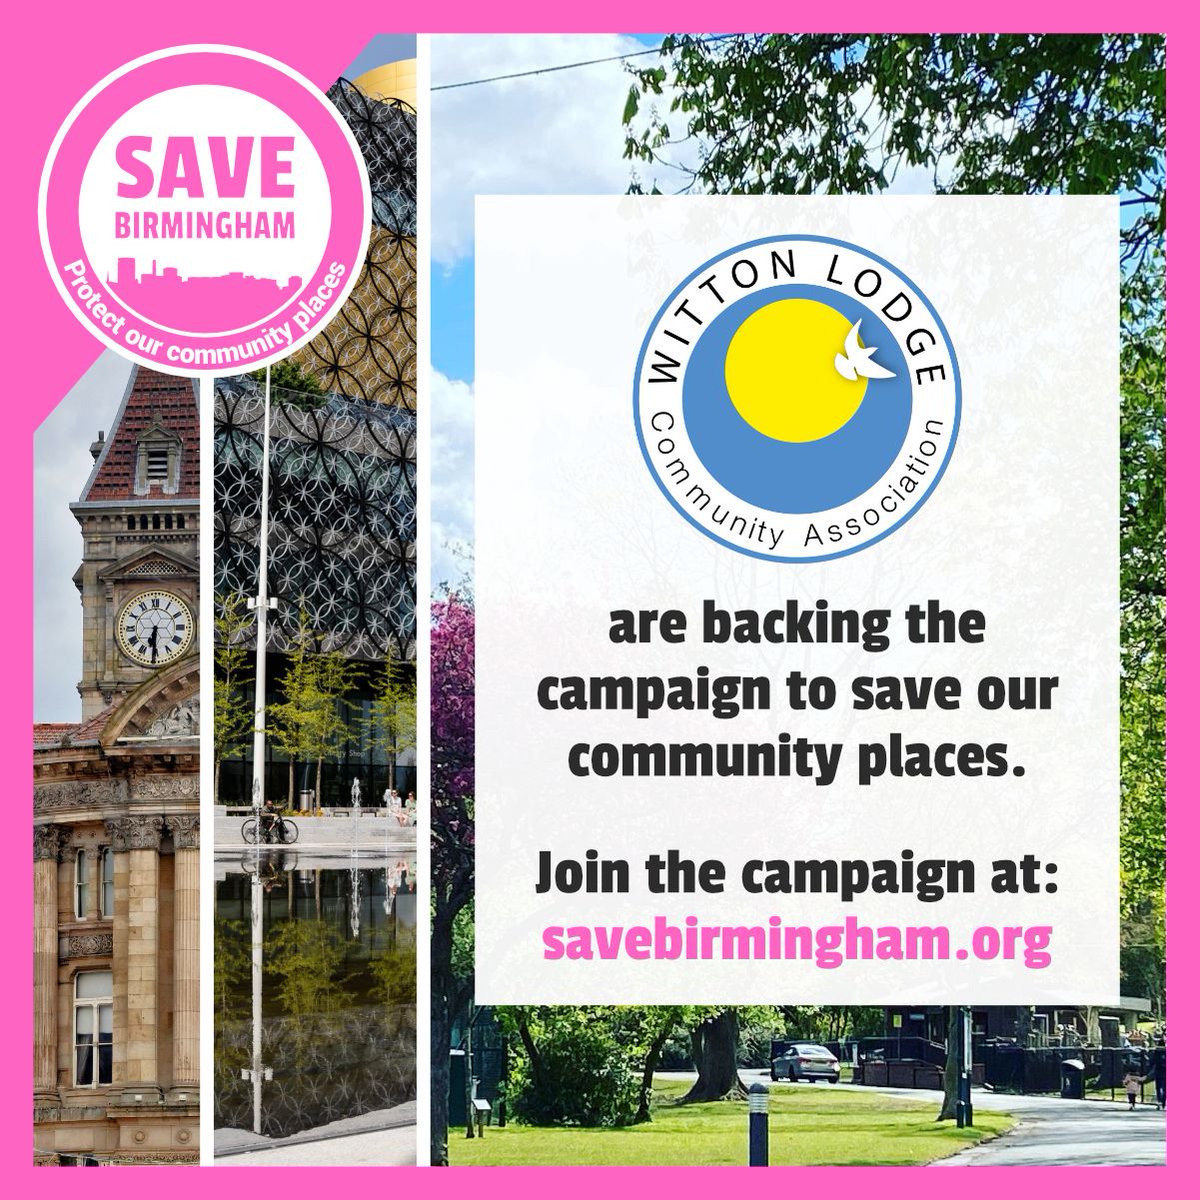 Starting the week with another organisation backing #SaveBirmingham. @wittonlodge are a community anchor organisation established by local residents. They've built & manage over 200 properties for rent & re-developed Perry Common Community Hall - the city's 1st asset transfer!